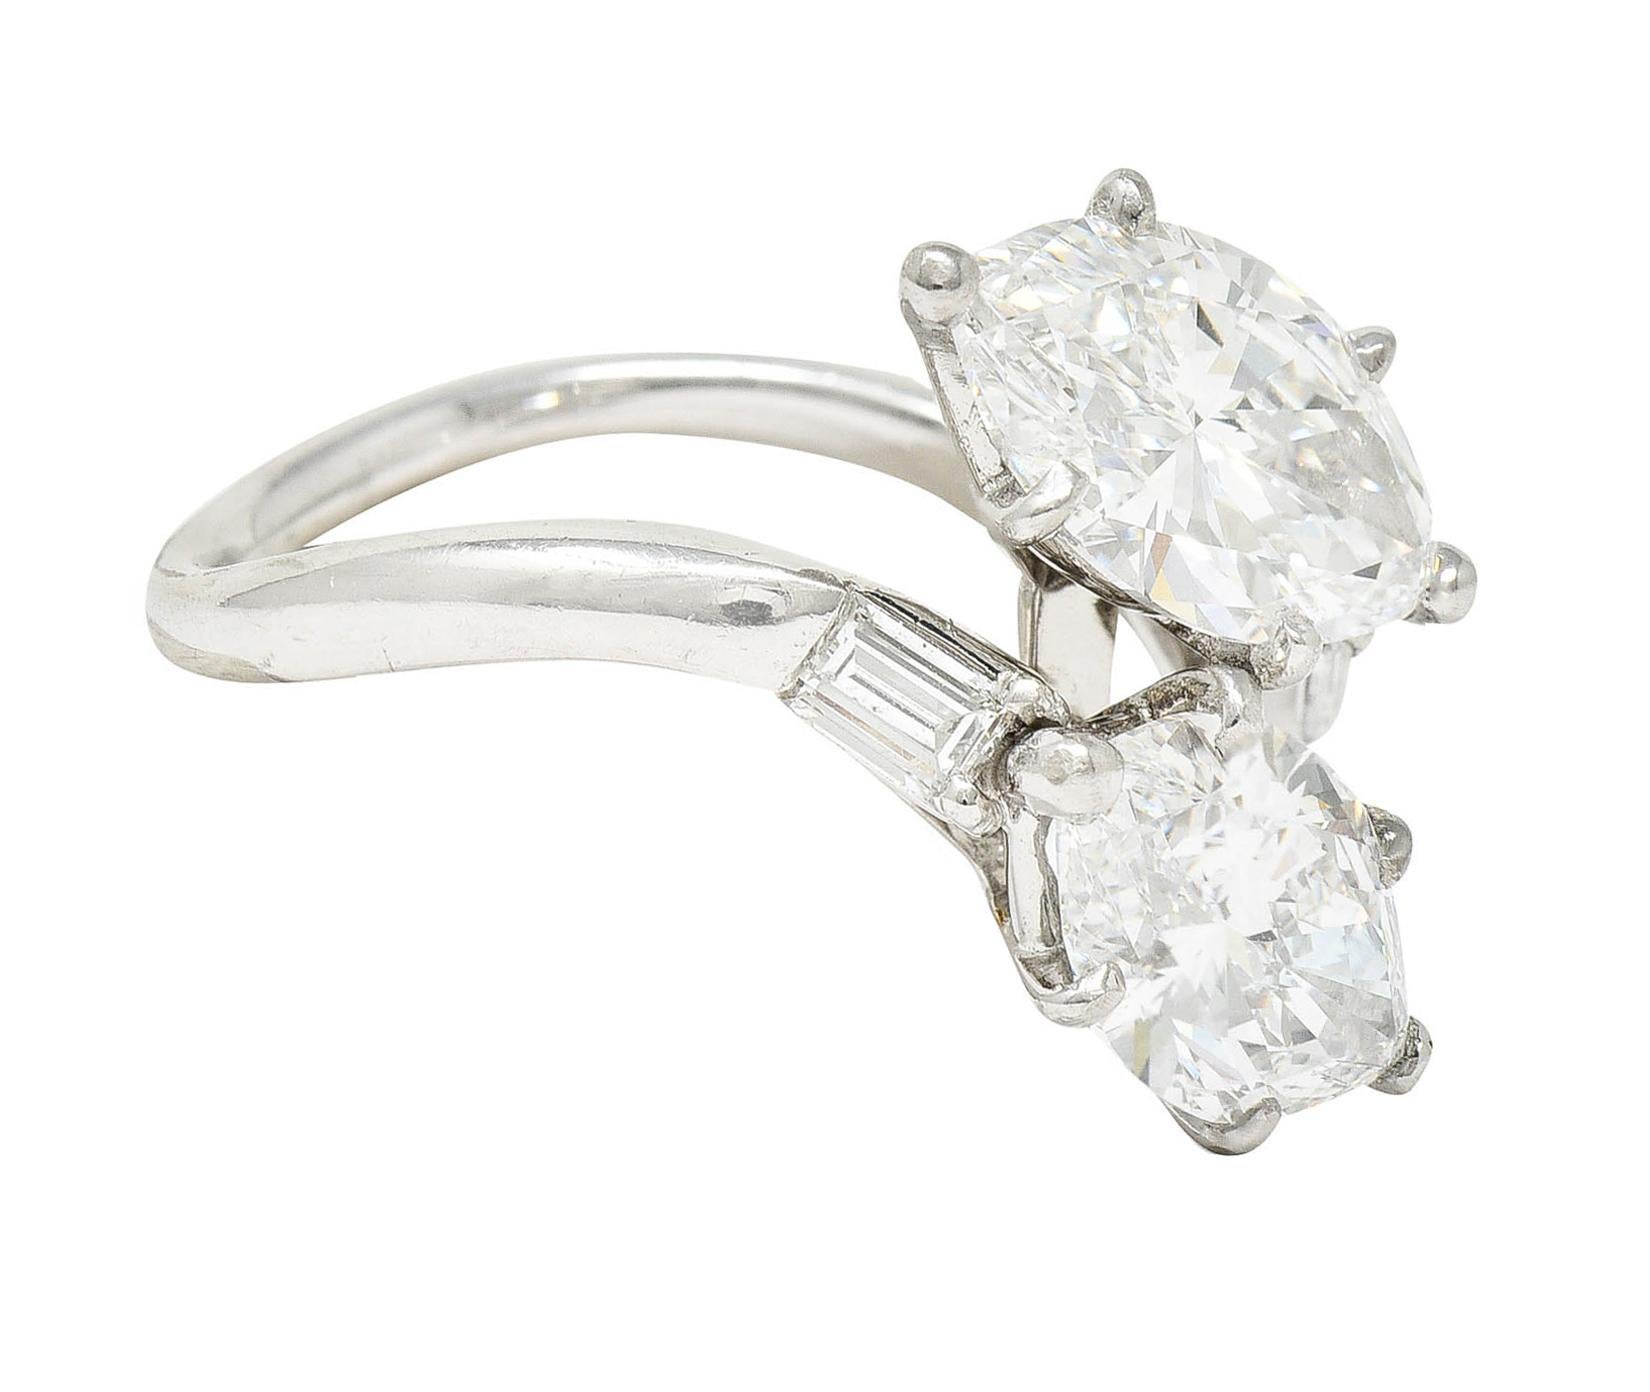 Bypass style ring features two basket set marquise cut diamonds

One weighing 1.49 carats with D color and VS1 clarity

Opposing weighs 1.48 carats with E color and VVS2 clarity

Shoulders are accented by rectangular step cut diamonds - eye clean